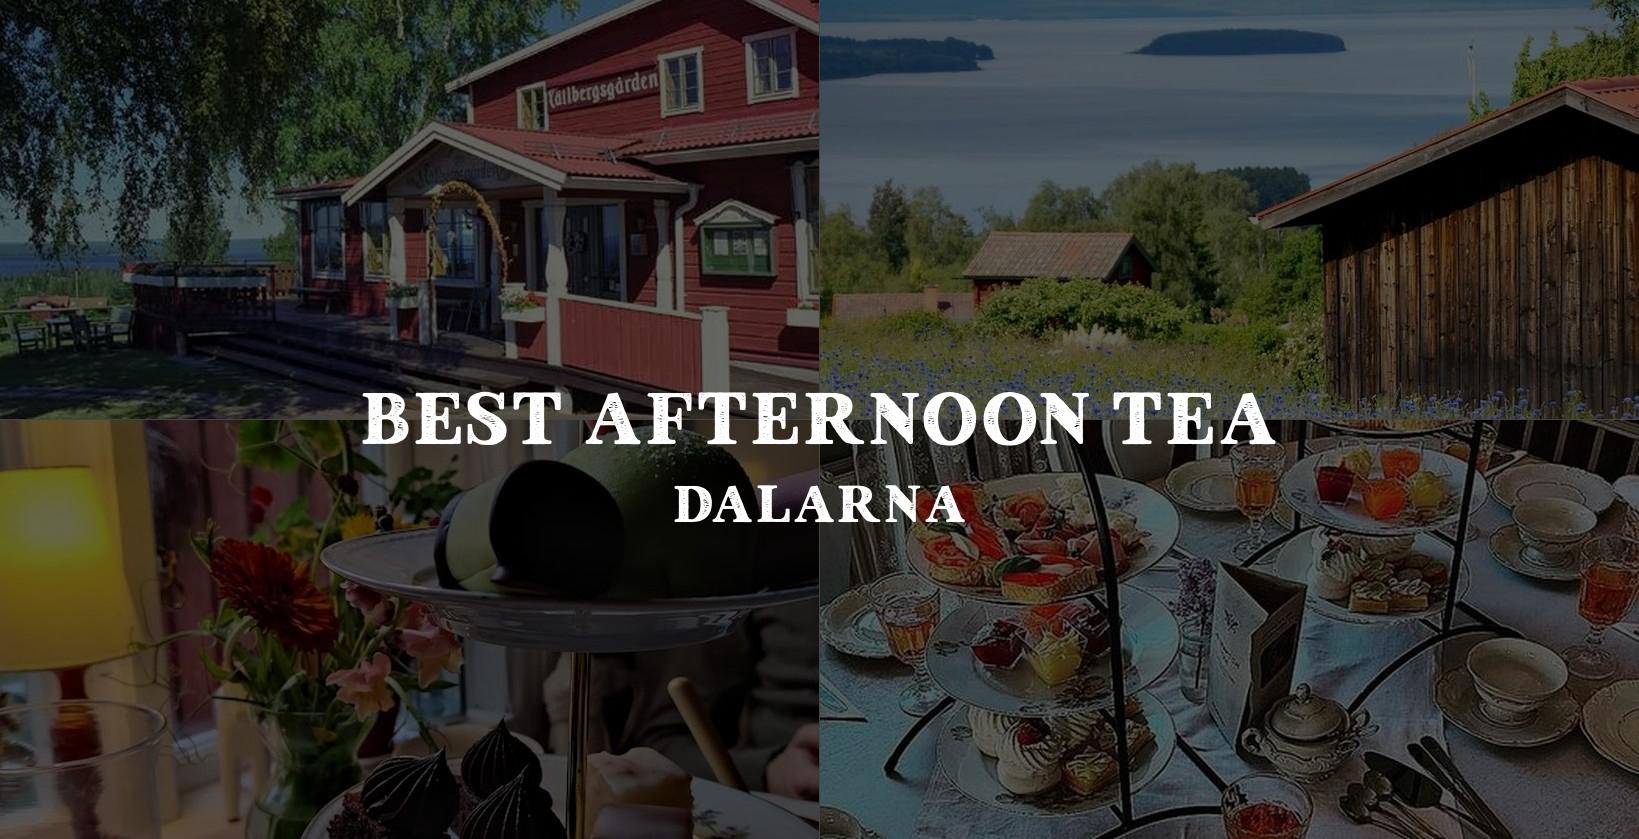 Choosing the perfect spot for afternoon tea in Dalarna